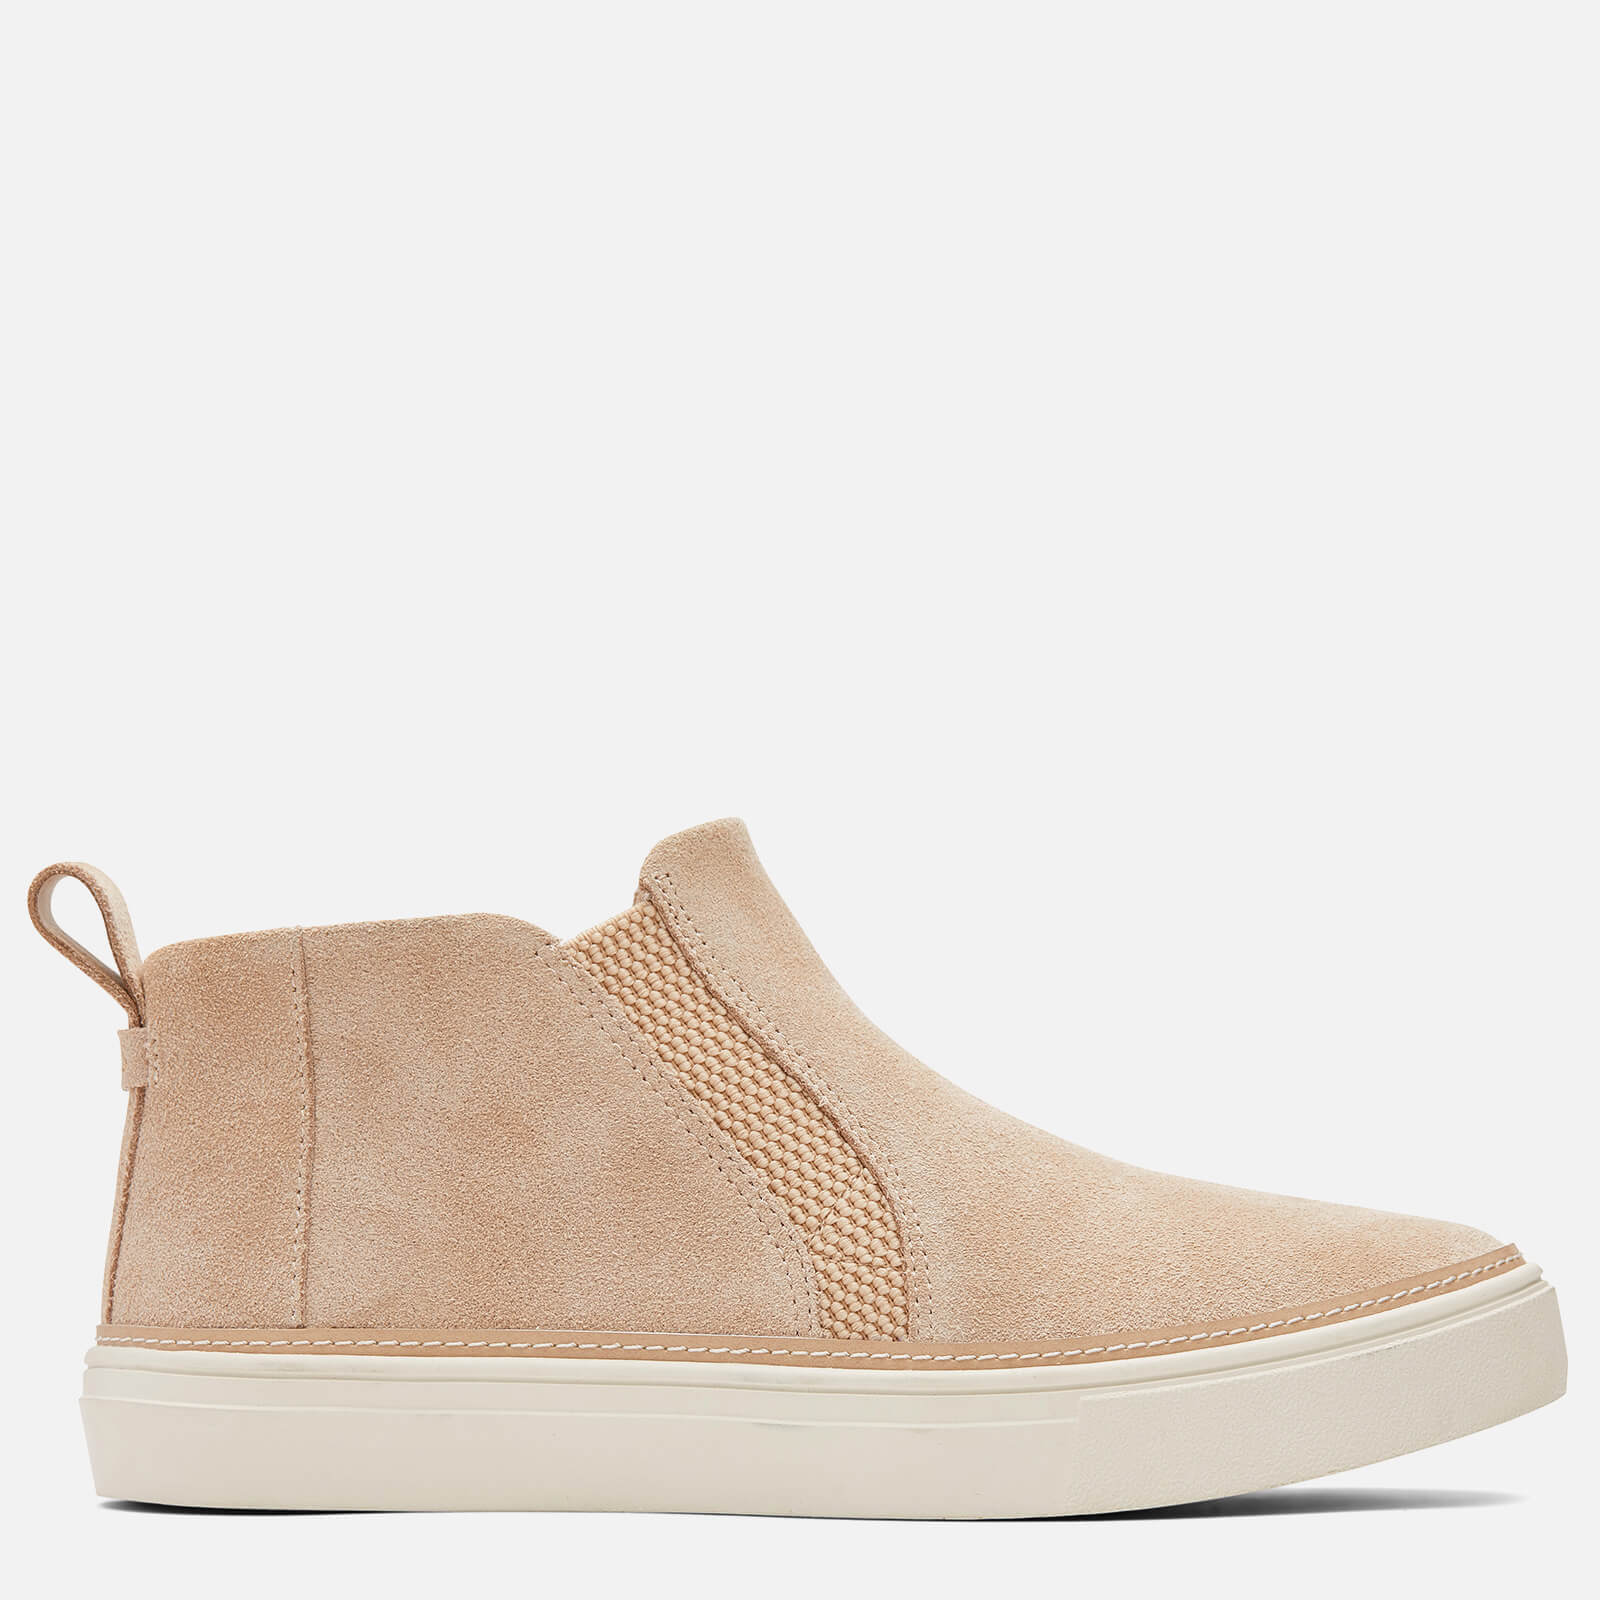 TOMS Women's Bryce Suede Ankle Boots - Sand - UK 3